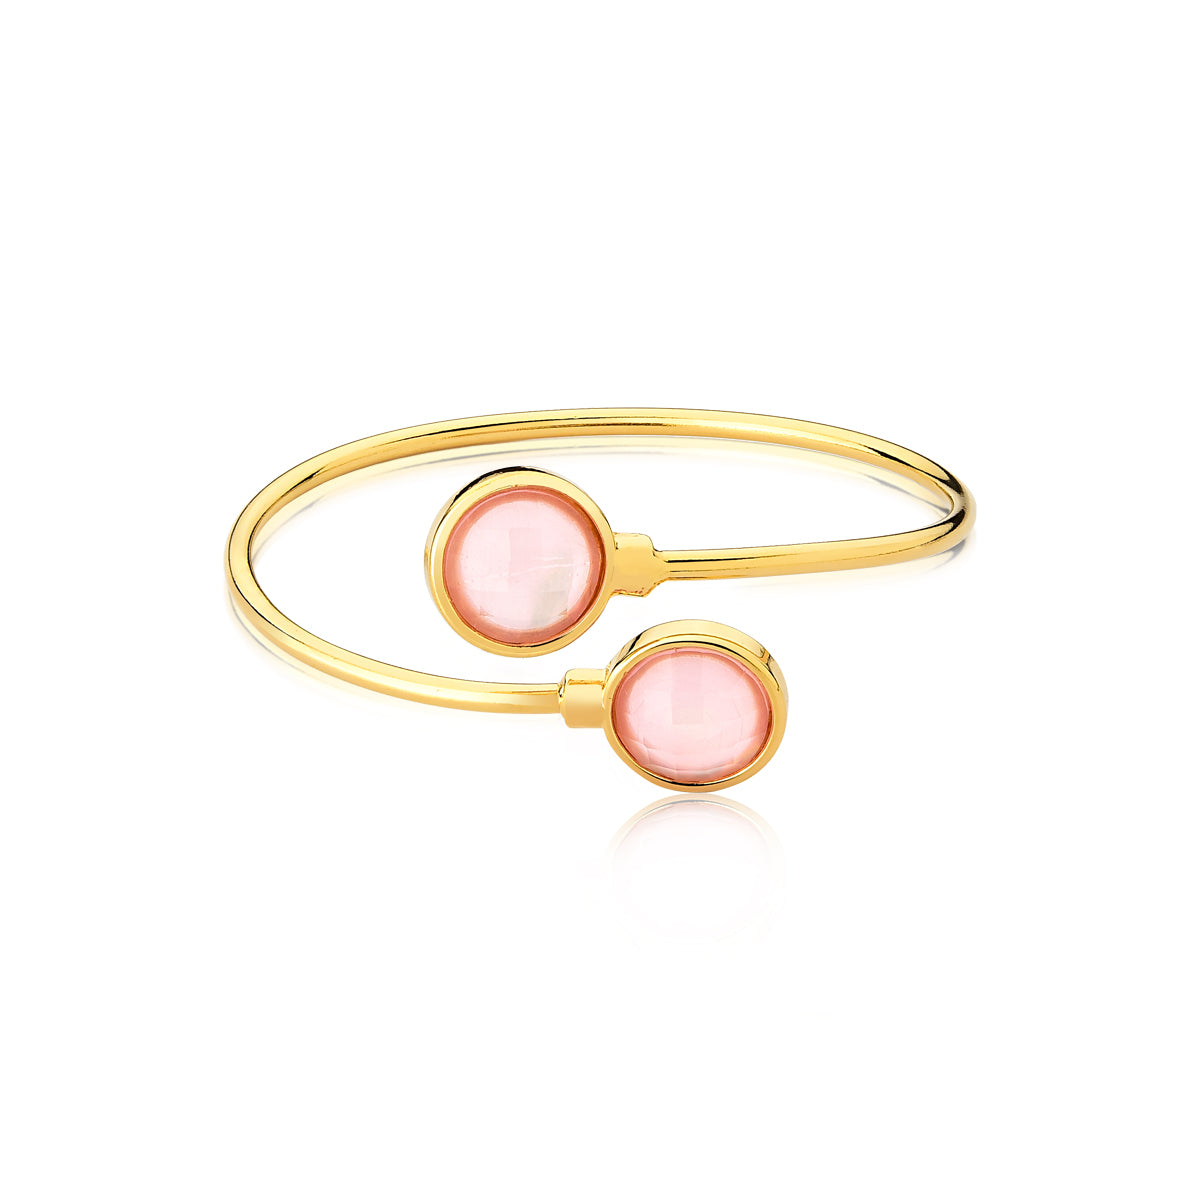 Cuff Bracelet in Pink Mother-of-Pearl | Gold Plated